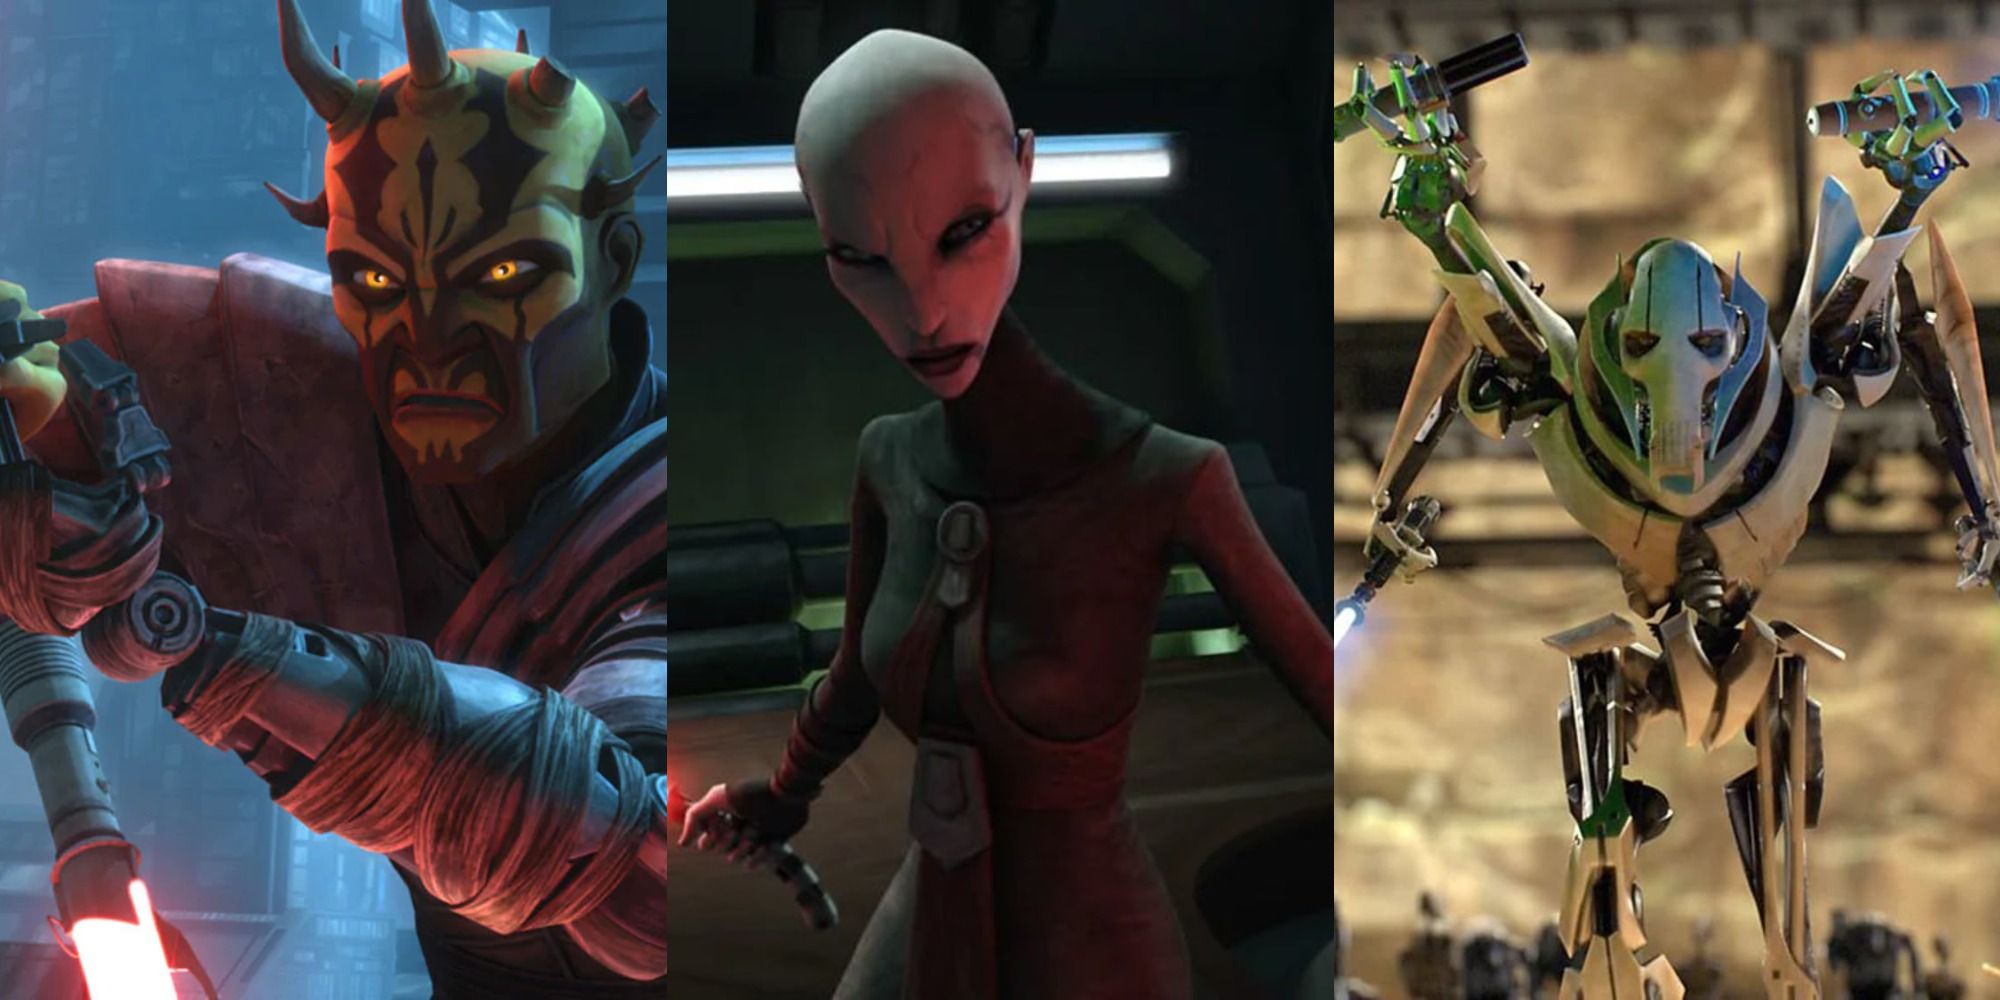 Split image of Savage Opress, Asajj Ventress, and General Grevious from Star Wars